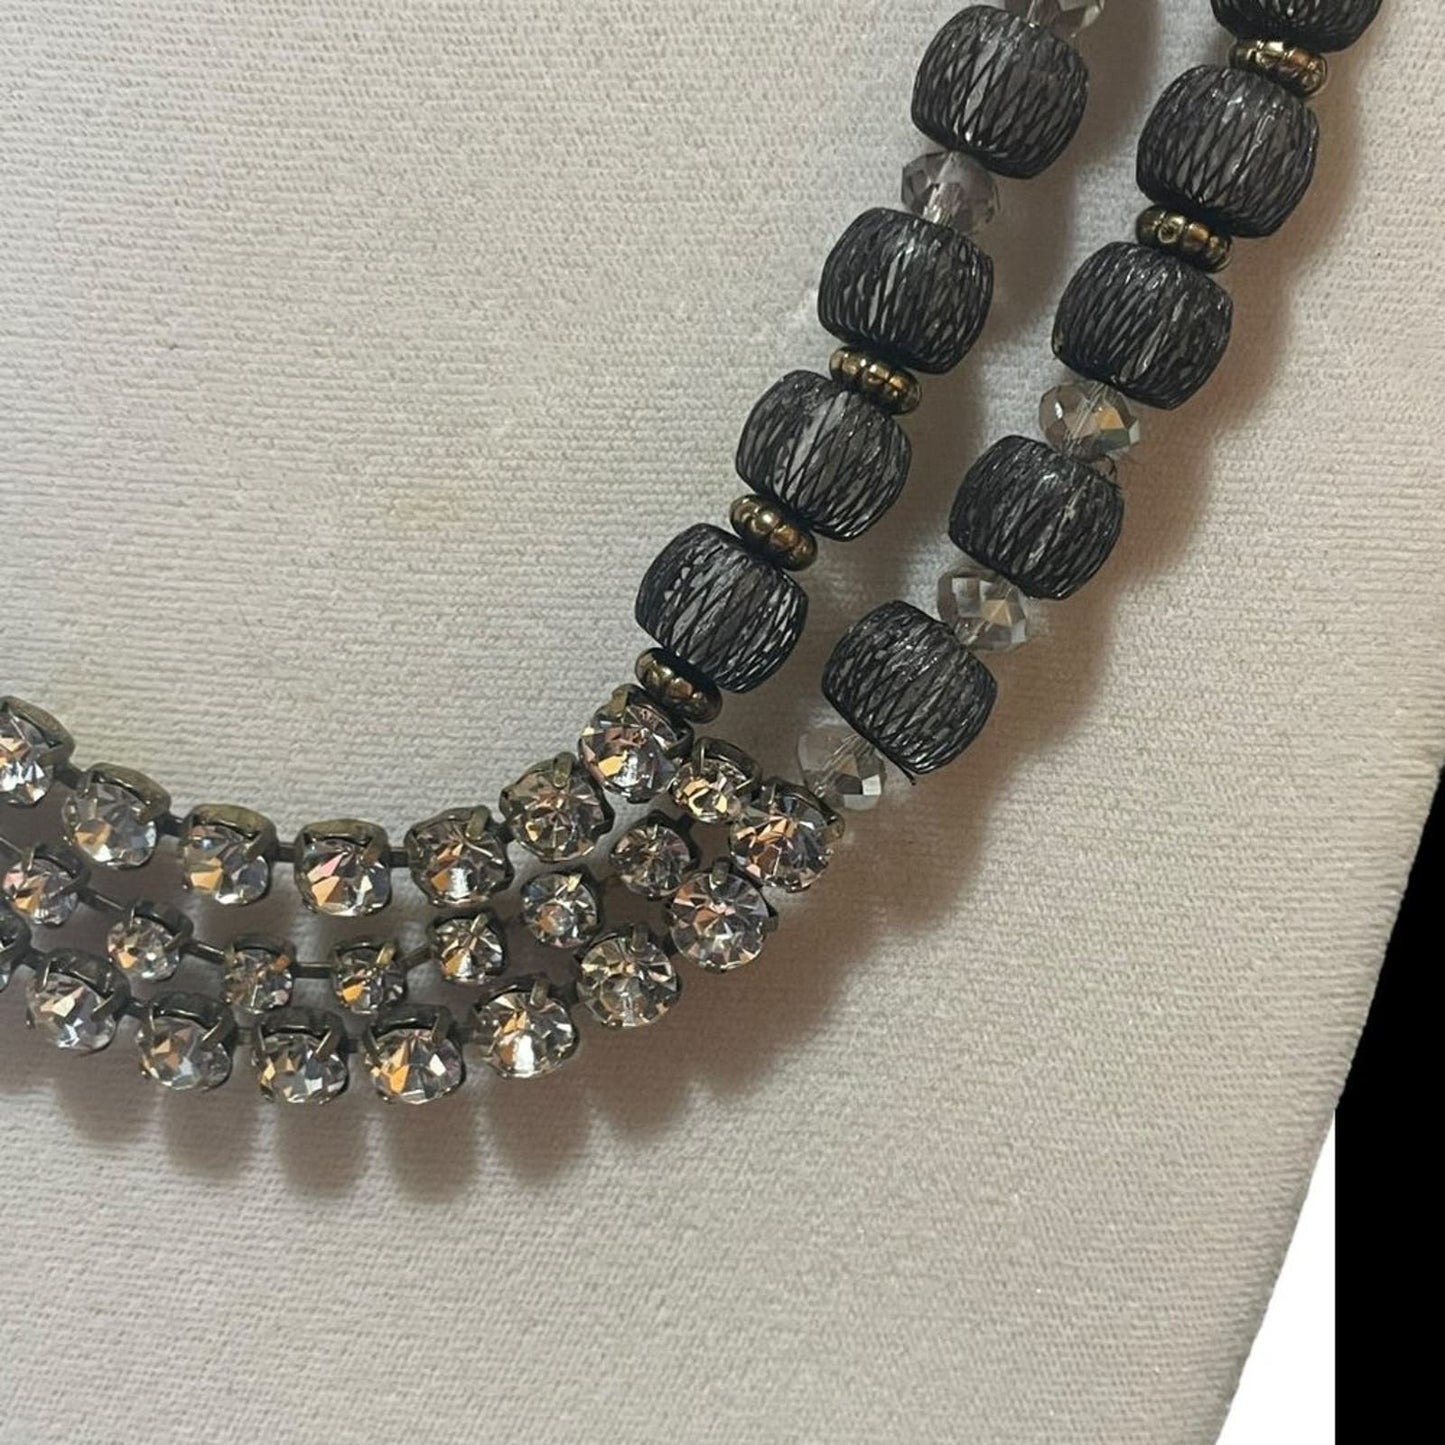 Chico's Silver Rhinestones with Gray Lace Beads